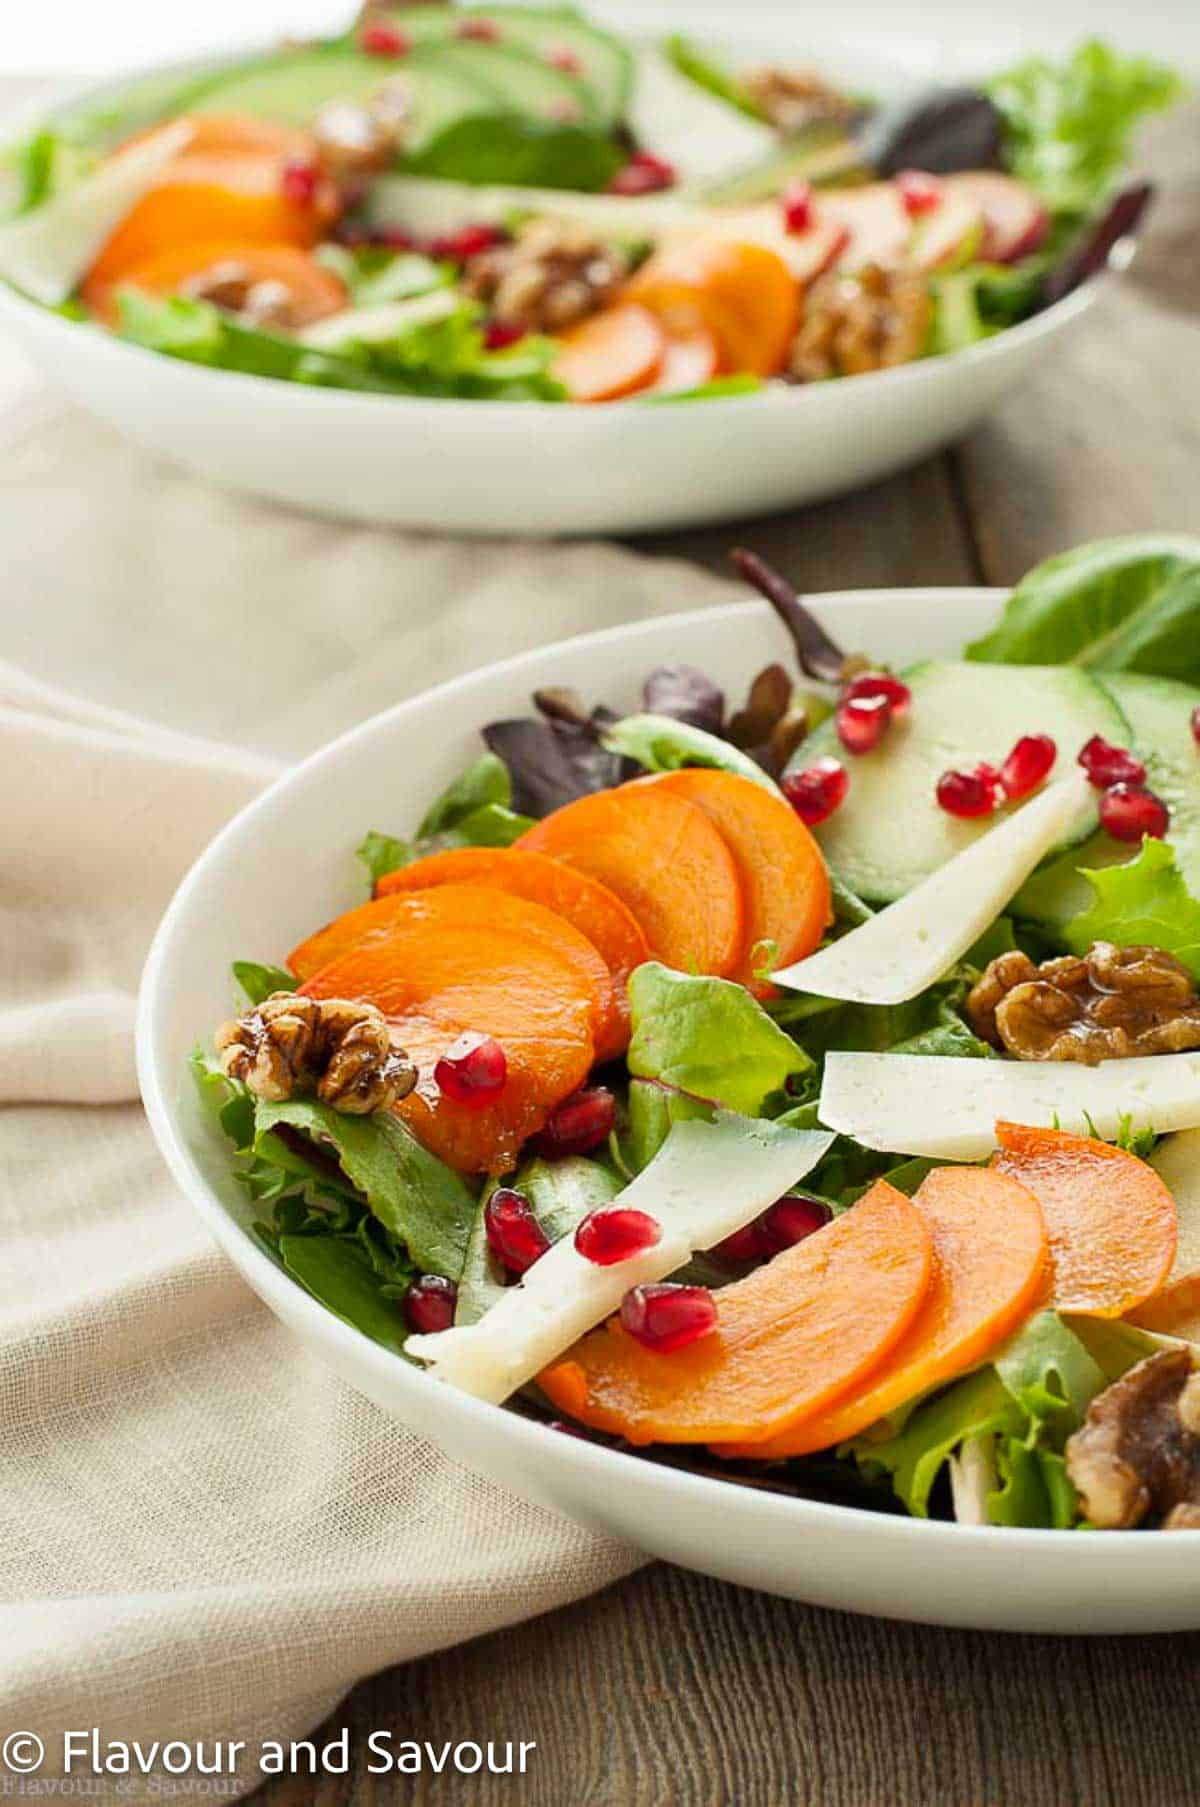 A bowl of fresh greens with sliced fruit and persimmons.